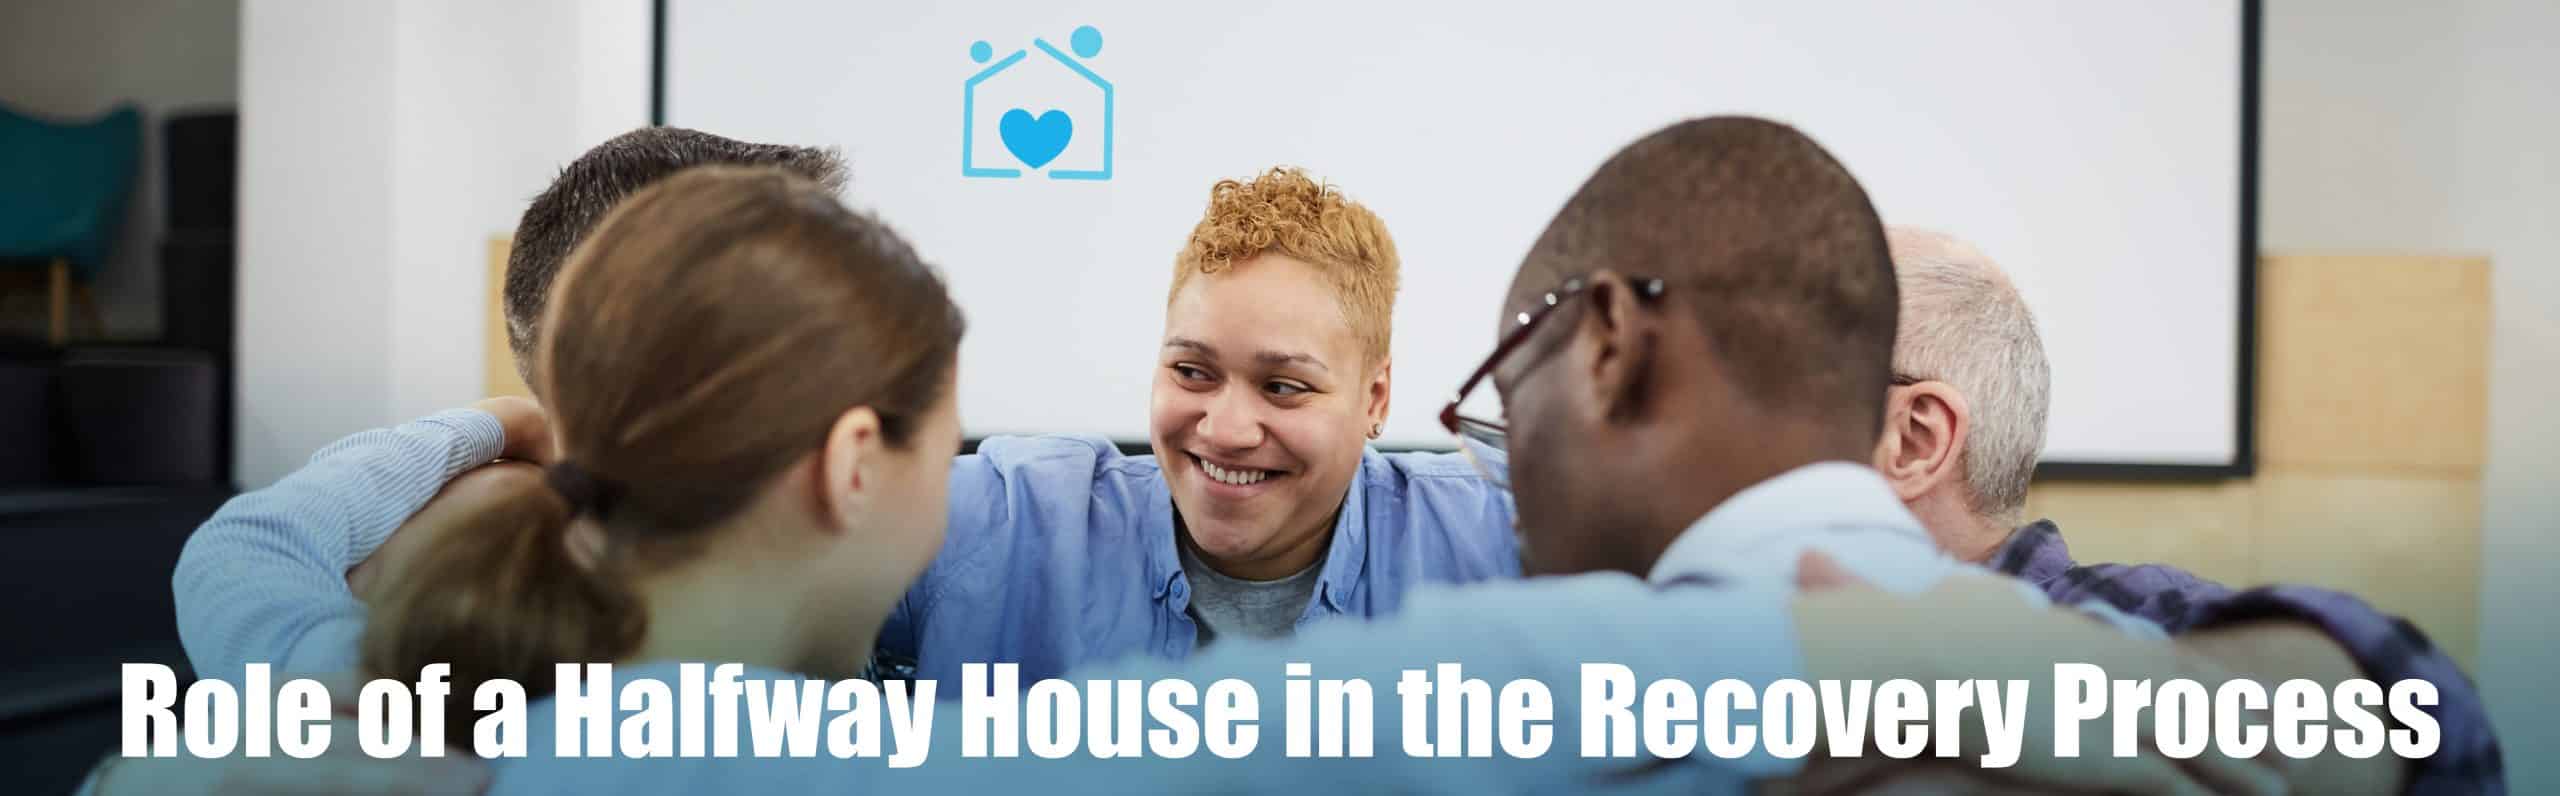 Role of a Halfway House in the Recovery Process